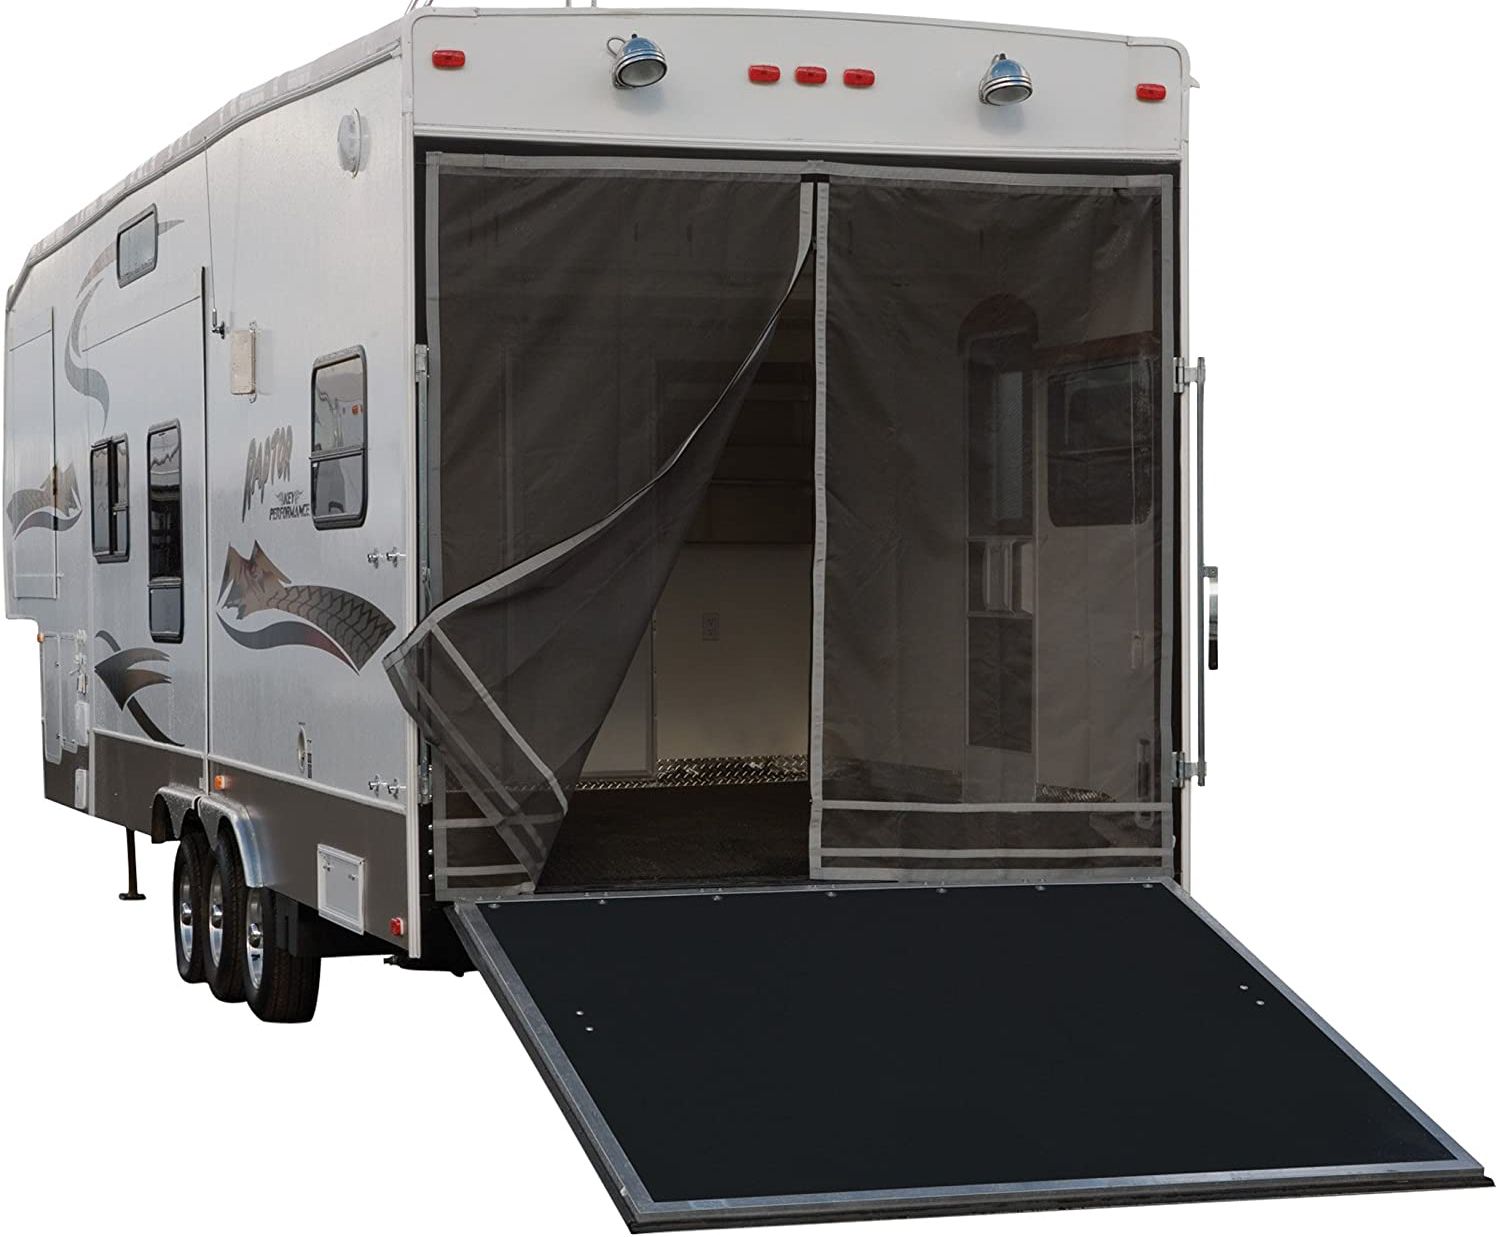 <p>These big, boxy trailers resemble the bodies of motorhomes. They’re equipped with not only living space, but also large cargo areas for “toys” associated with active RVing, such as ATVs, dirt bikes, kayaks, and personal watercraft.</p>